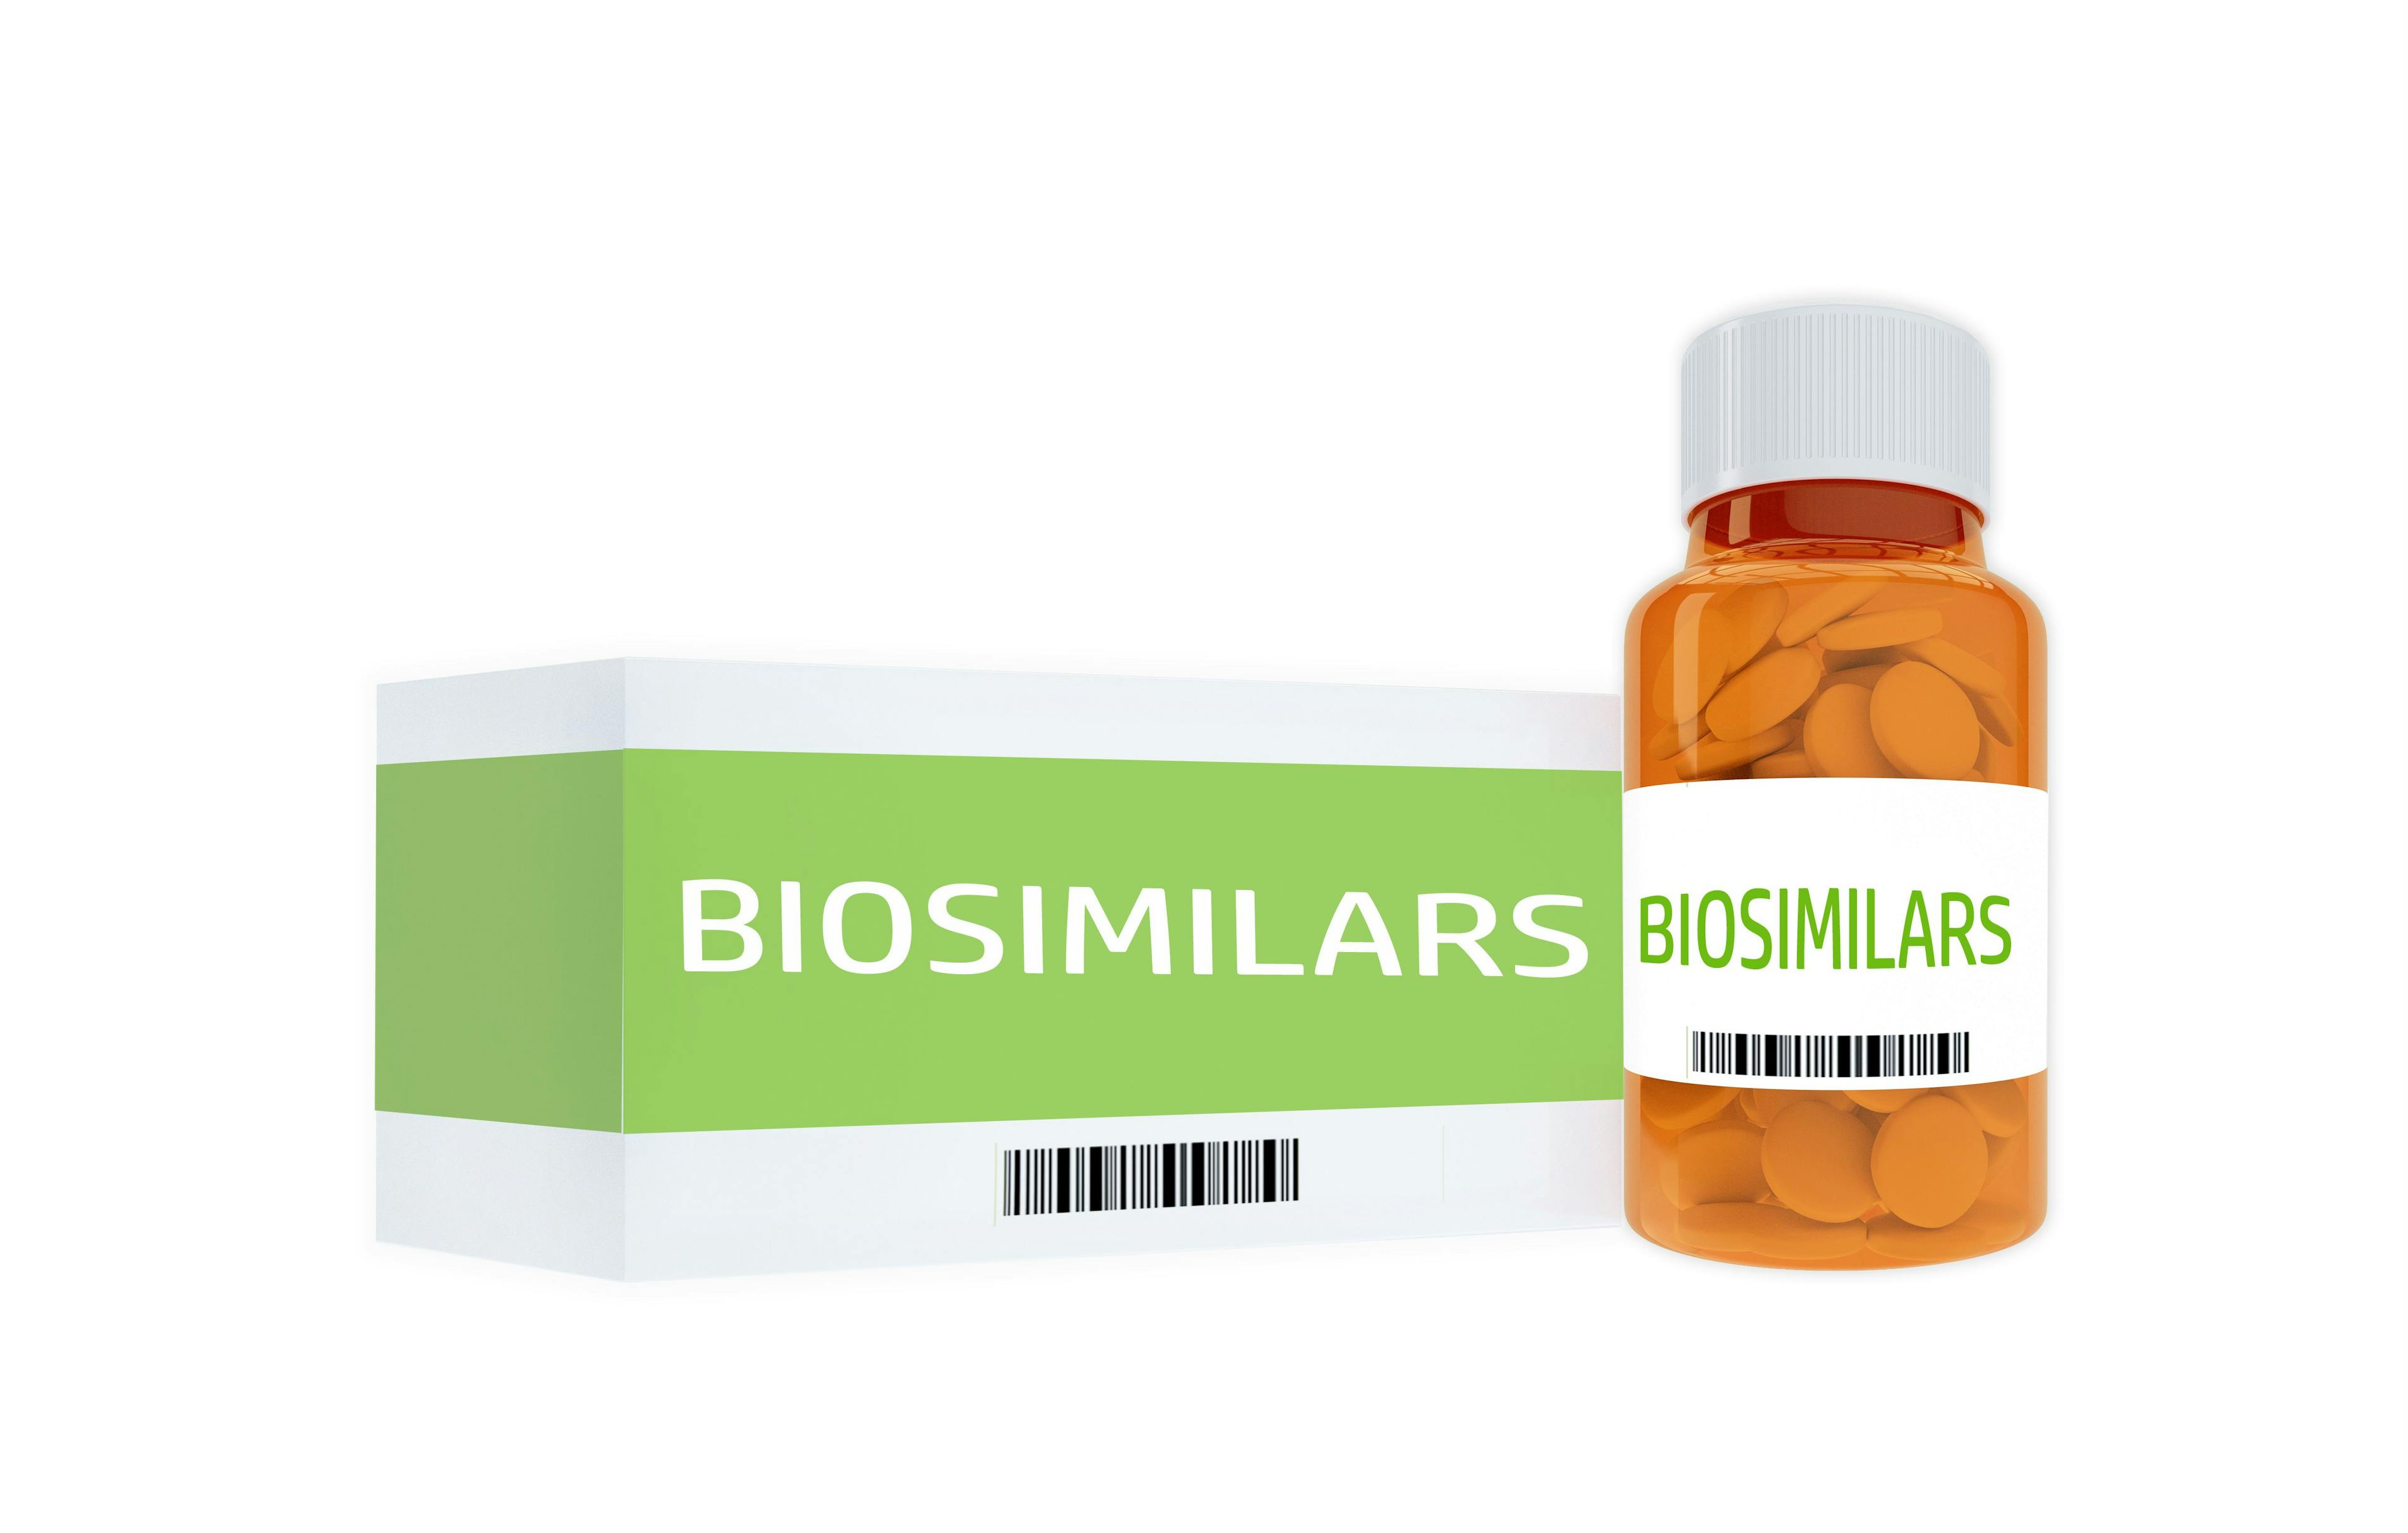 Cardinal Health Predicts 2022 to be Turning Point for Biosimilars in the U.S.